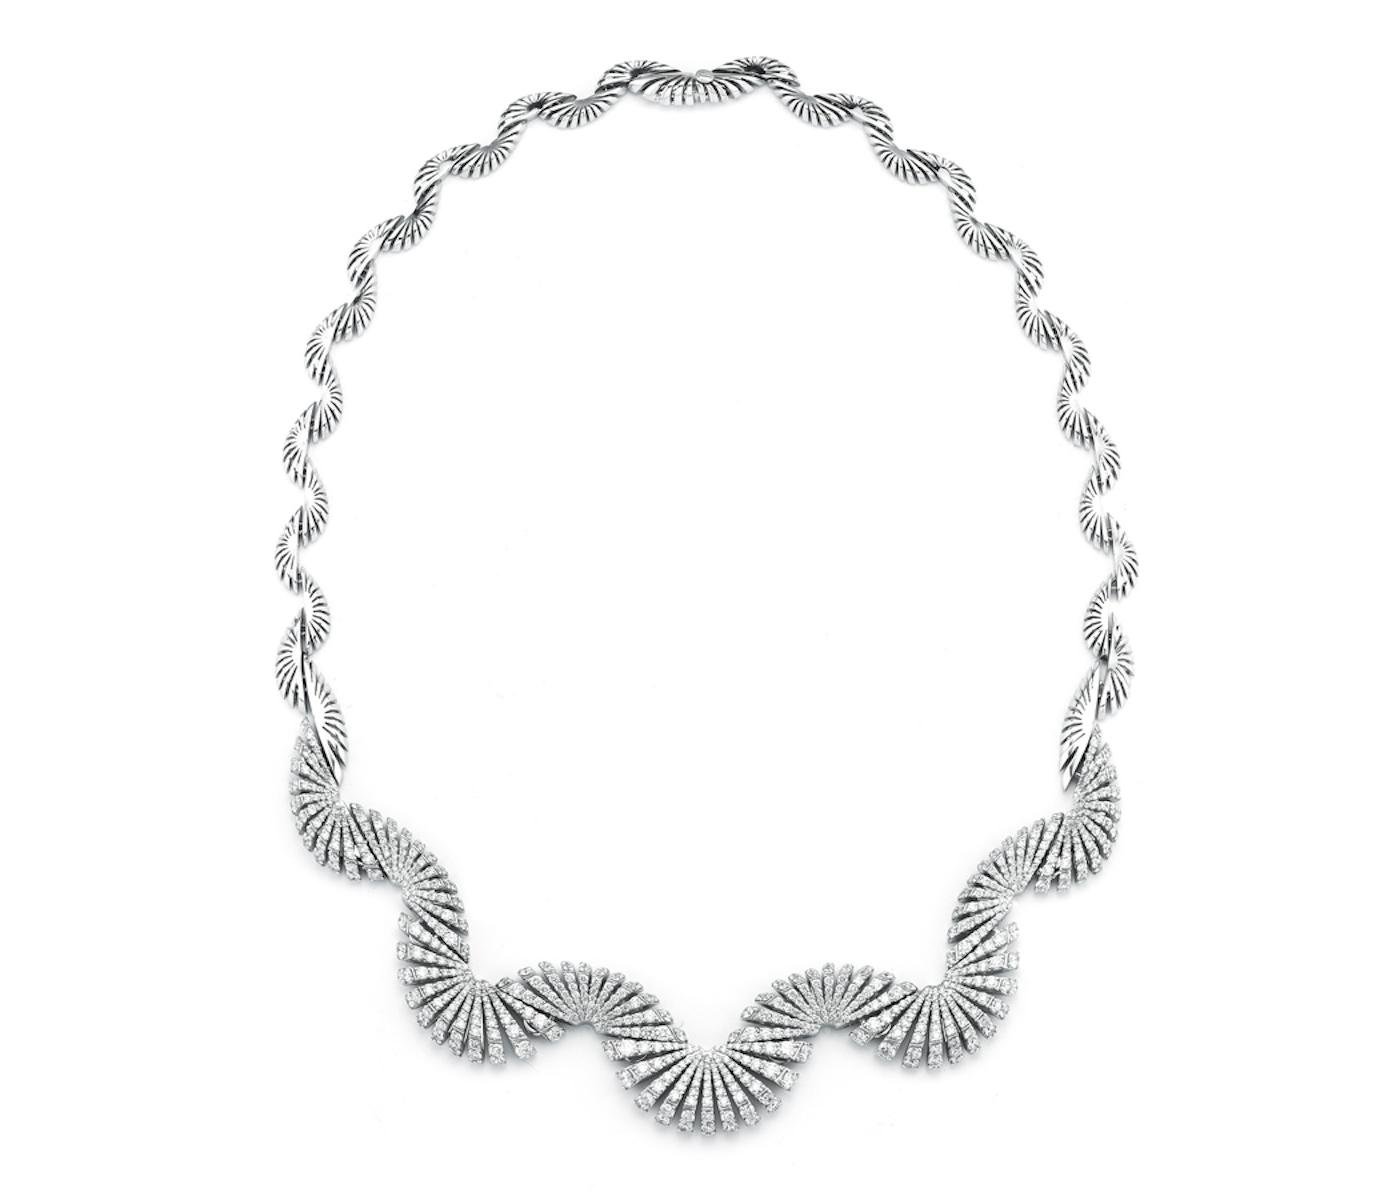 Necklace by Miseno